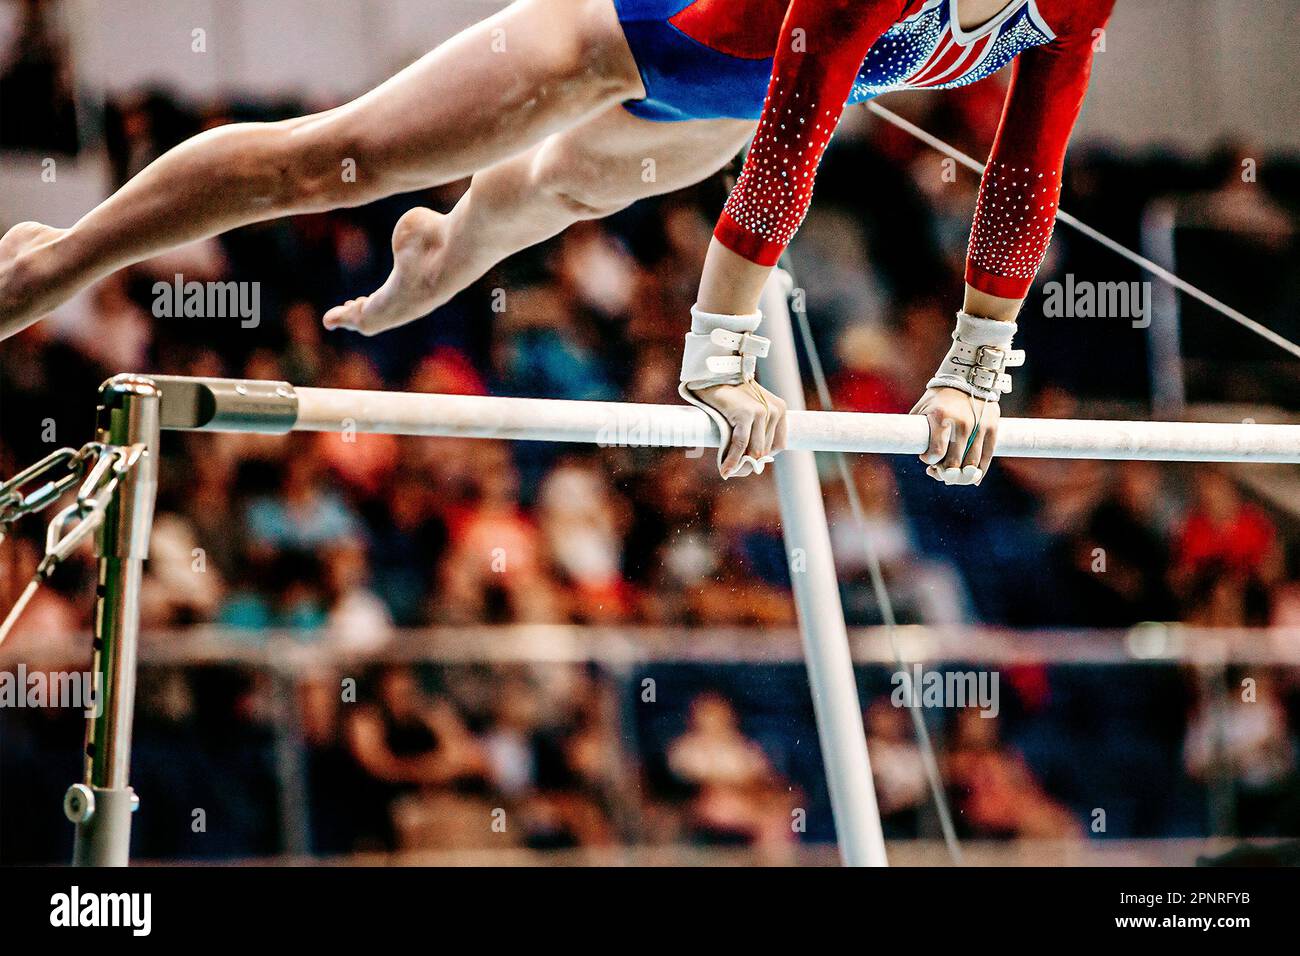 close-up body part female gymnast exercise on uneven bars in artistic gymnastics, sports summer games Stock Photo